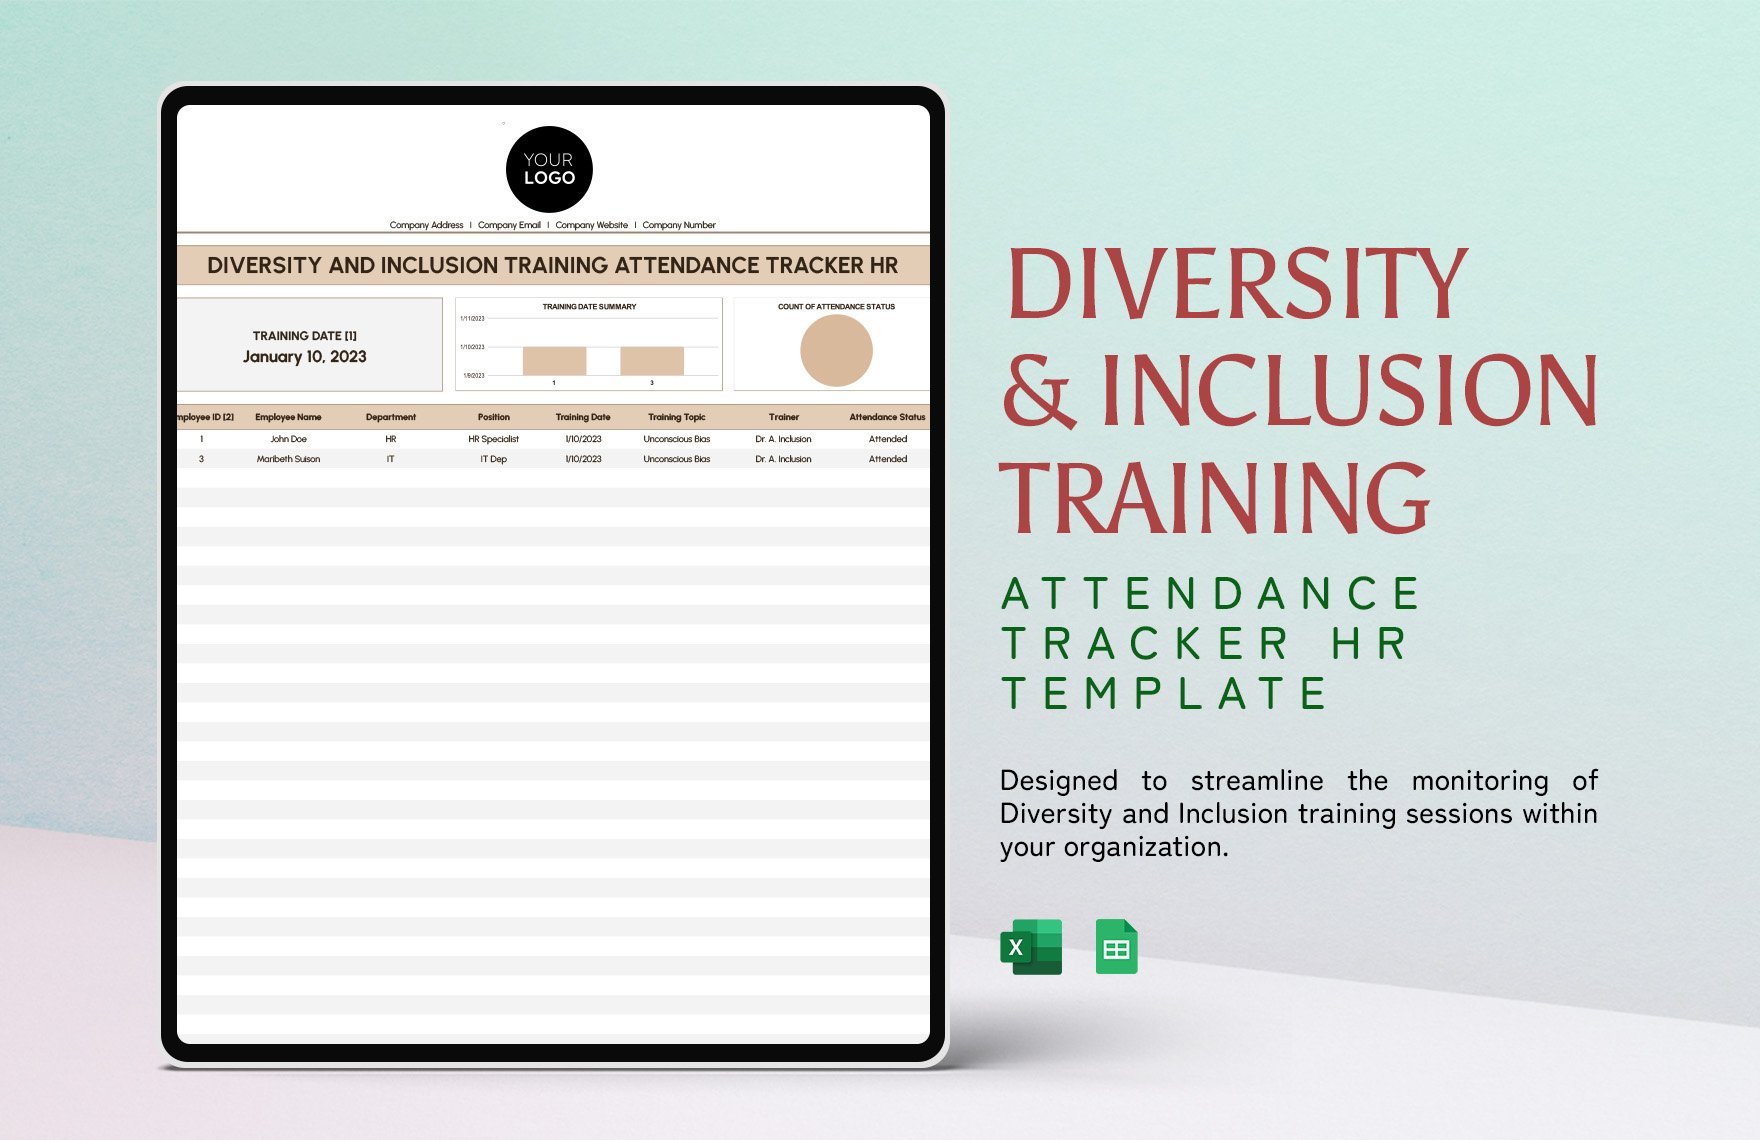 Diversity and Inclusion Training Attendance Tracker HR Template